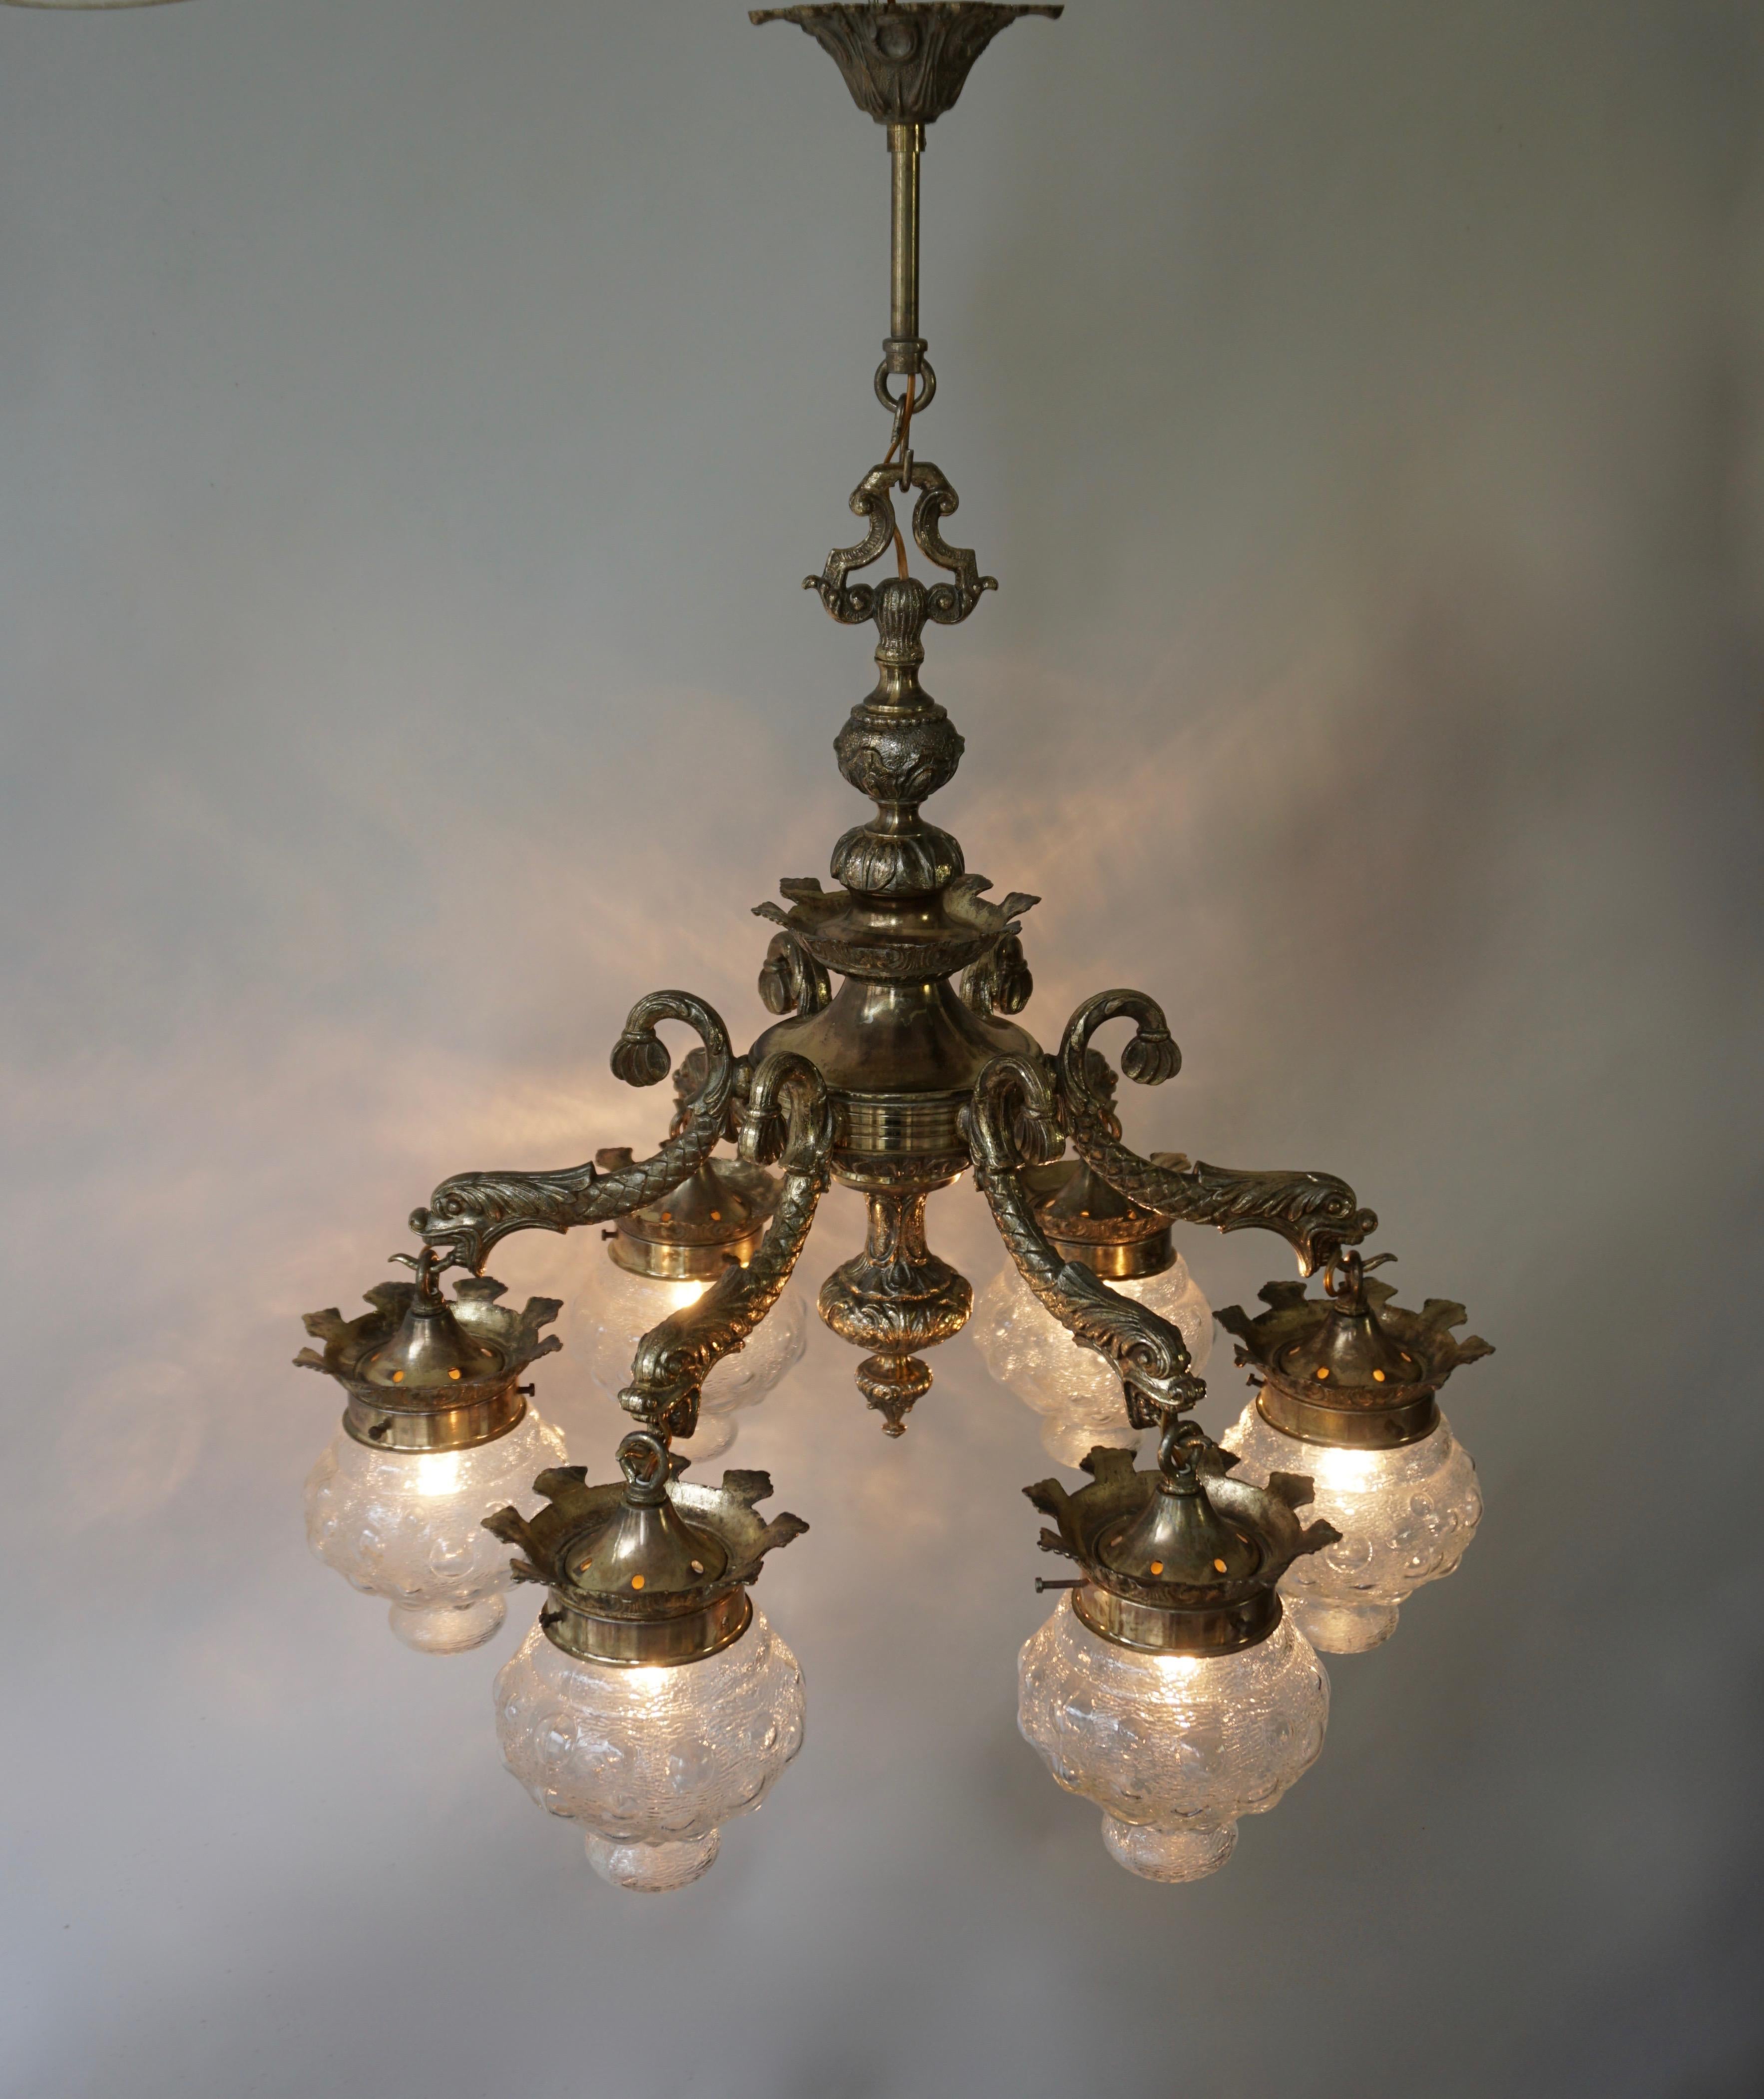 Glass Stunning Brass Chandelier in Gothic or Medieval Style with Dragon Sculptures For Sale